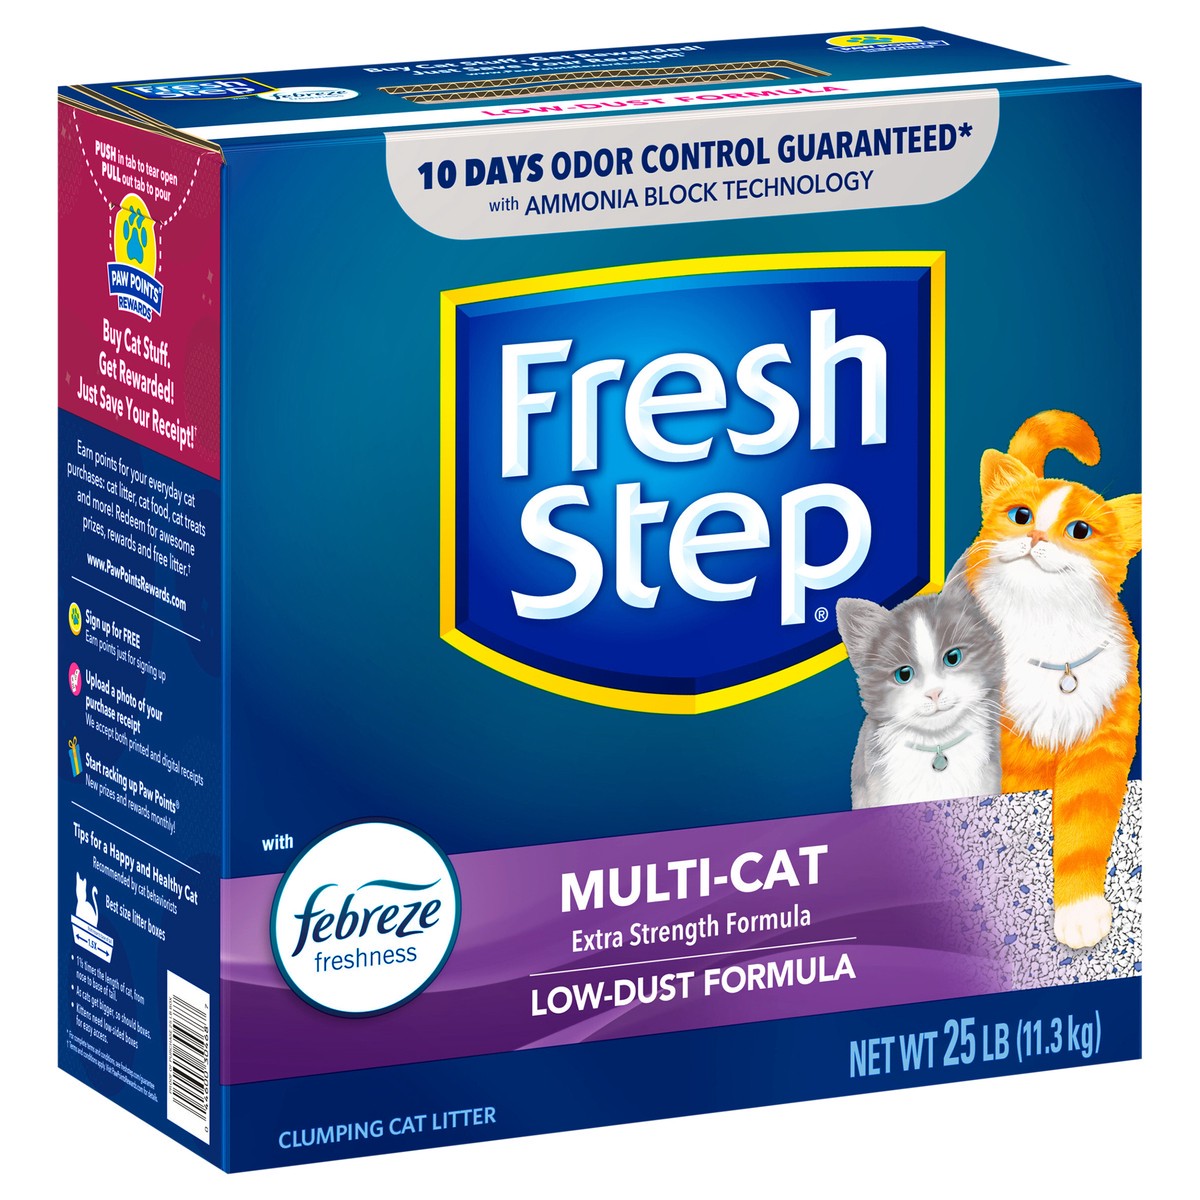 slide 4 of 9, Fresh Step Multi-Cat With Febreze Freshness Scented Clumping Cat Litter, 25 lb